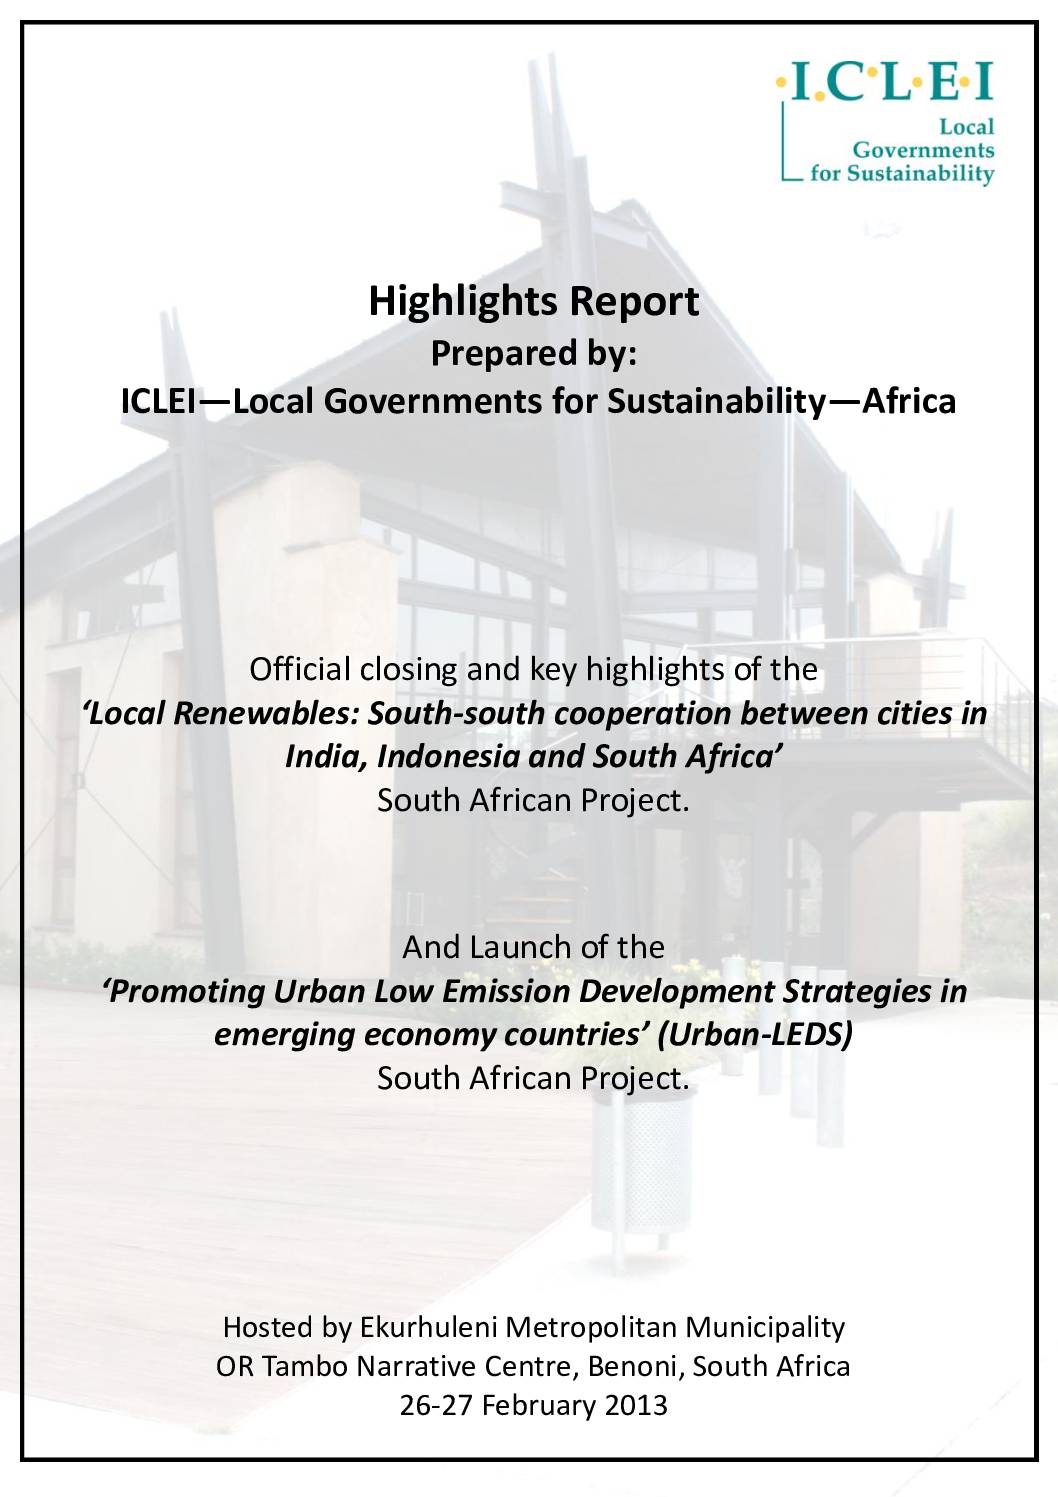 Local Governments for Sustainability Highlights Report – Africa